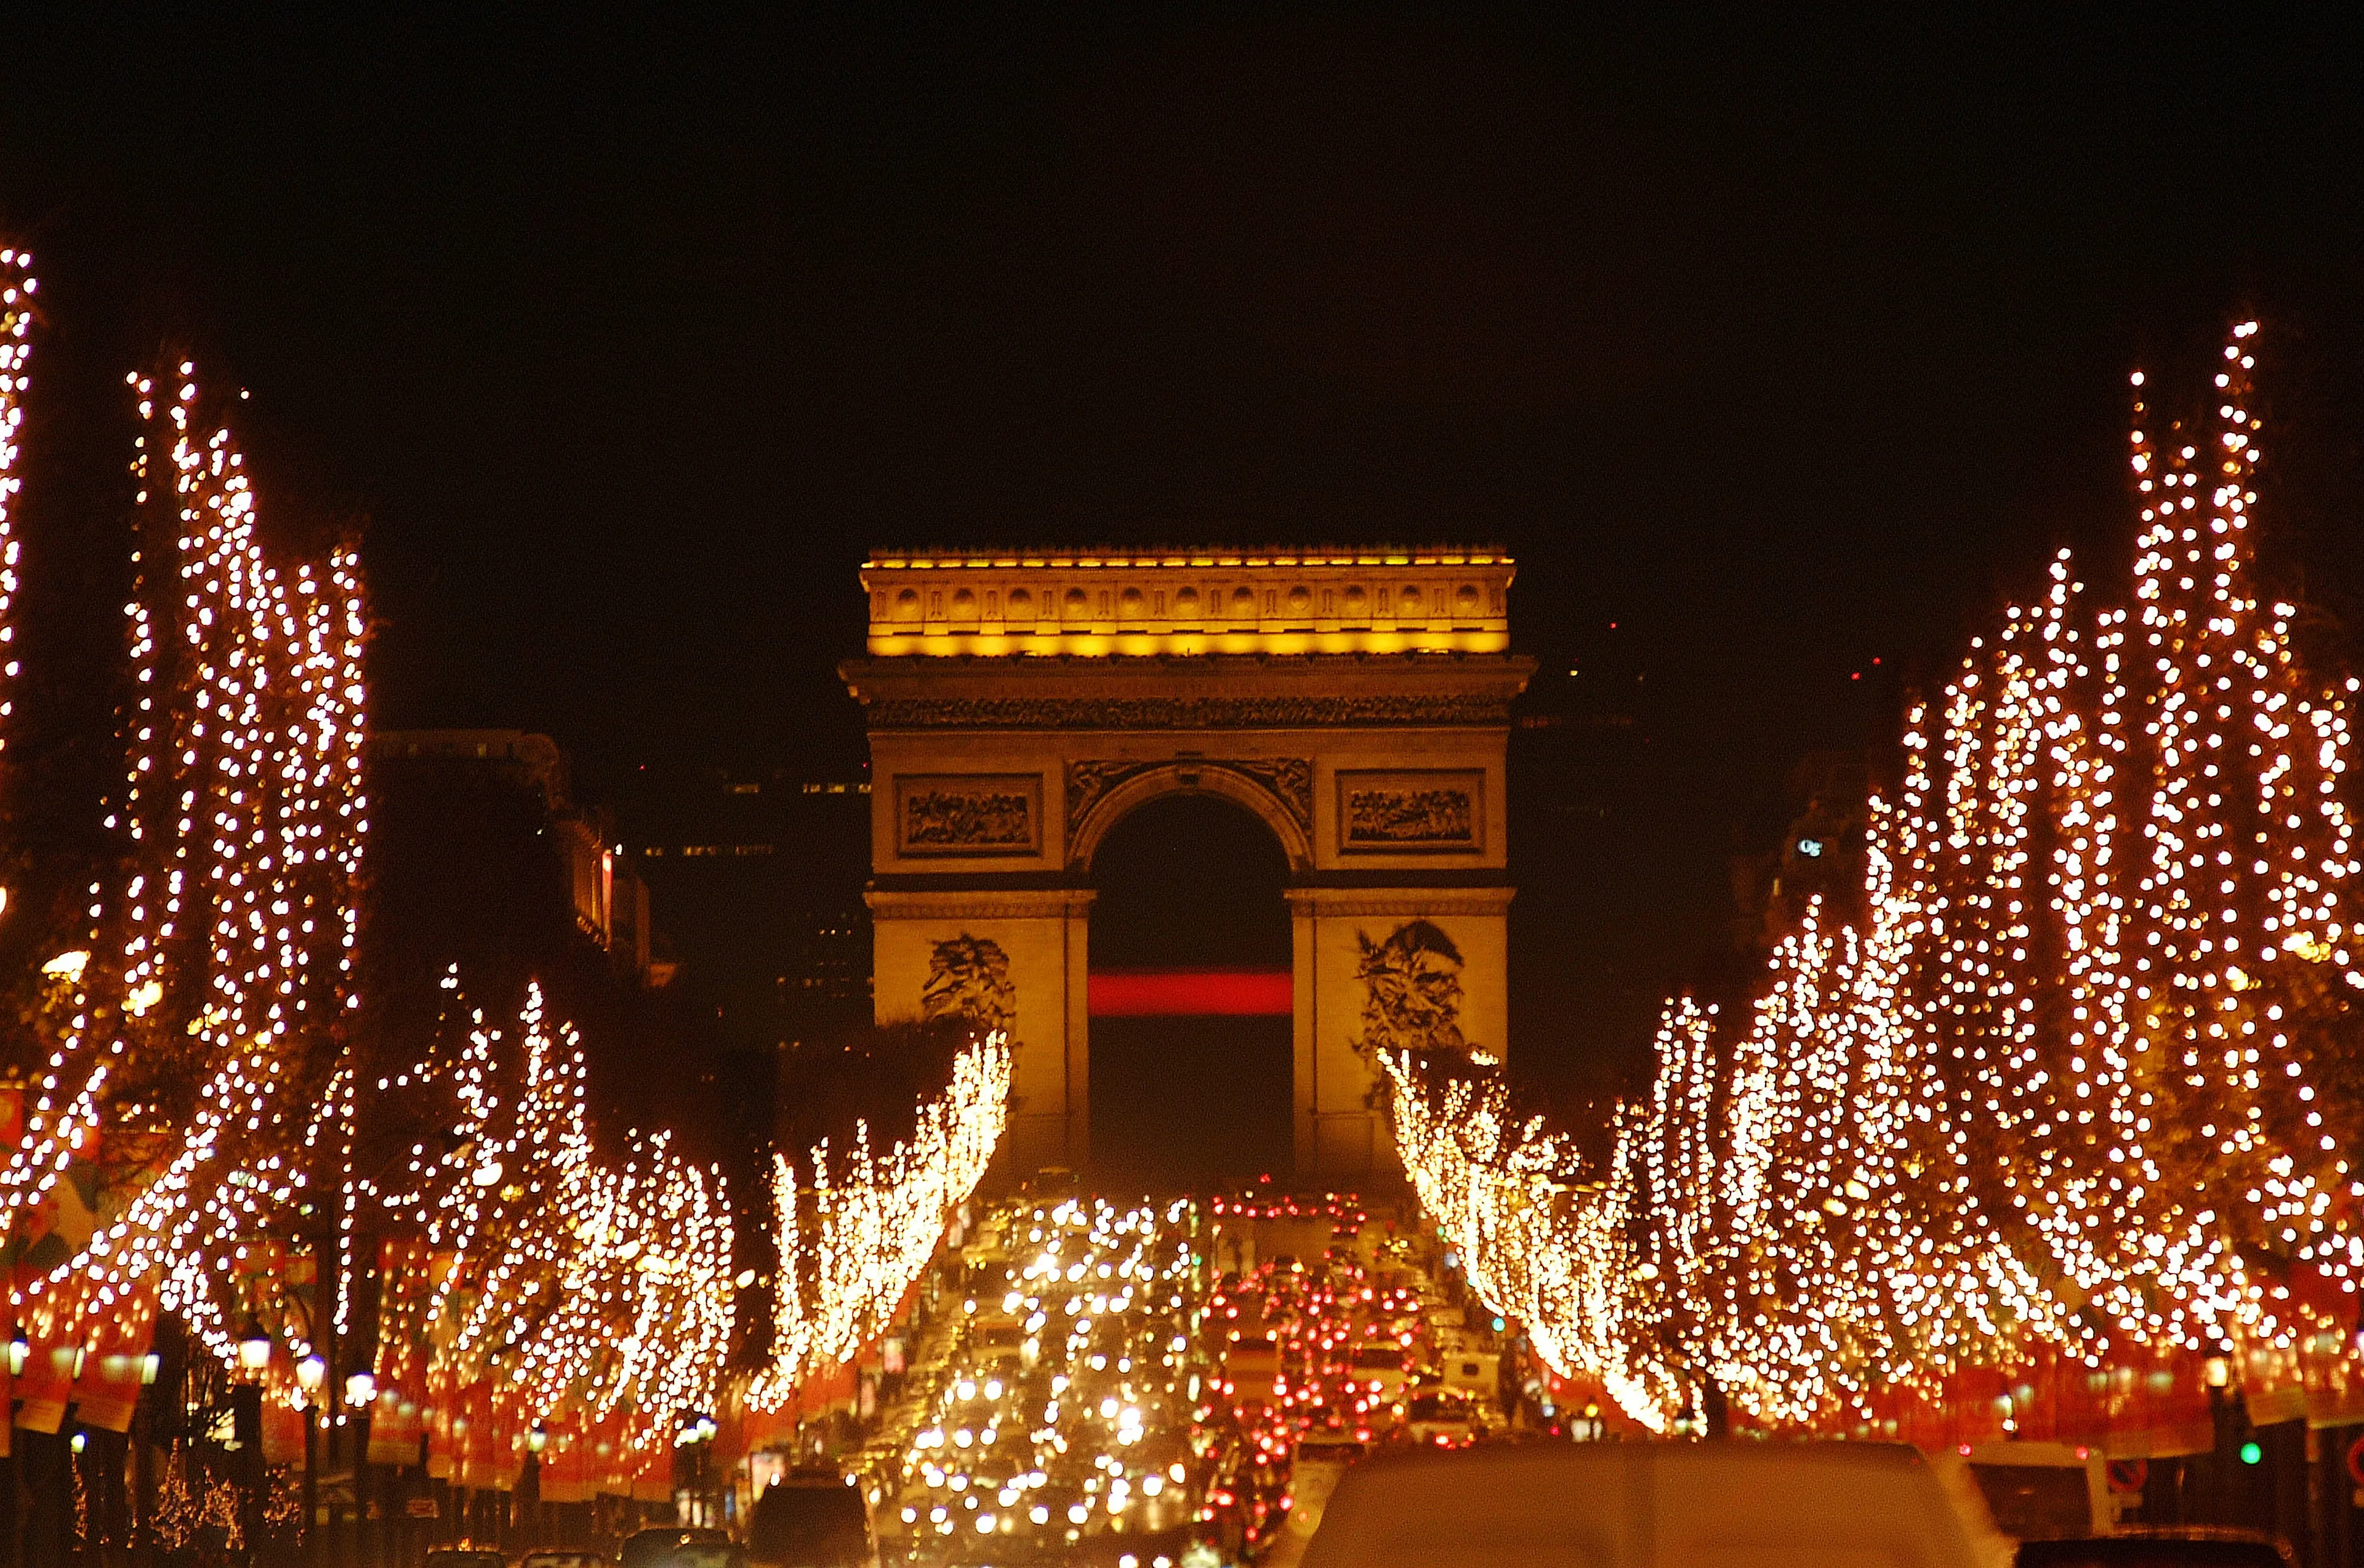 Arc de Triomphe and Christmas Illuminations on Champs Elysees